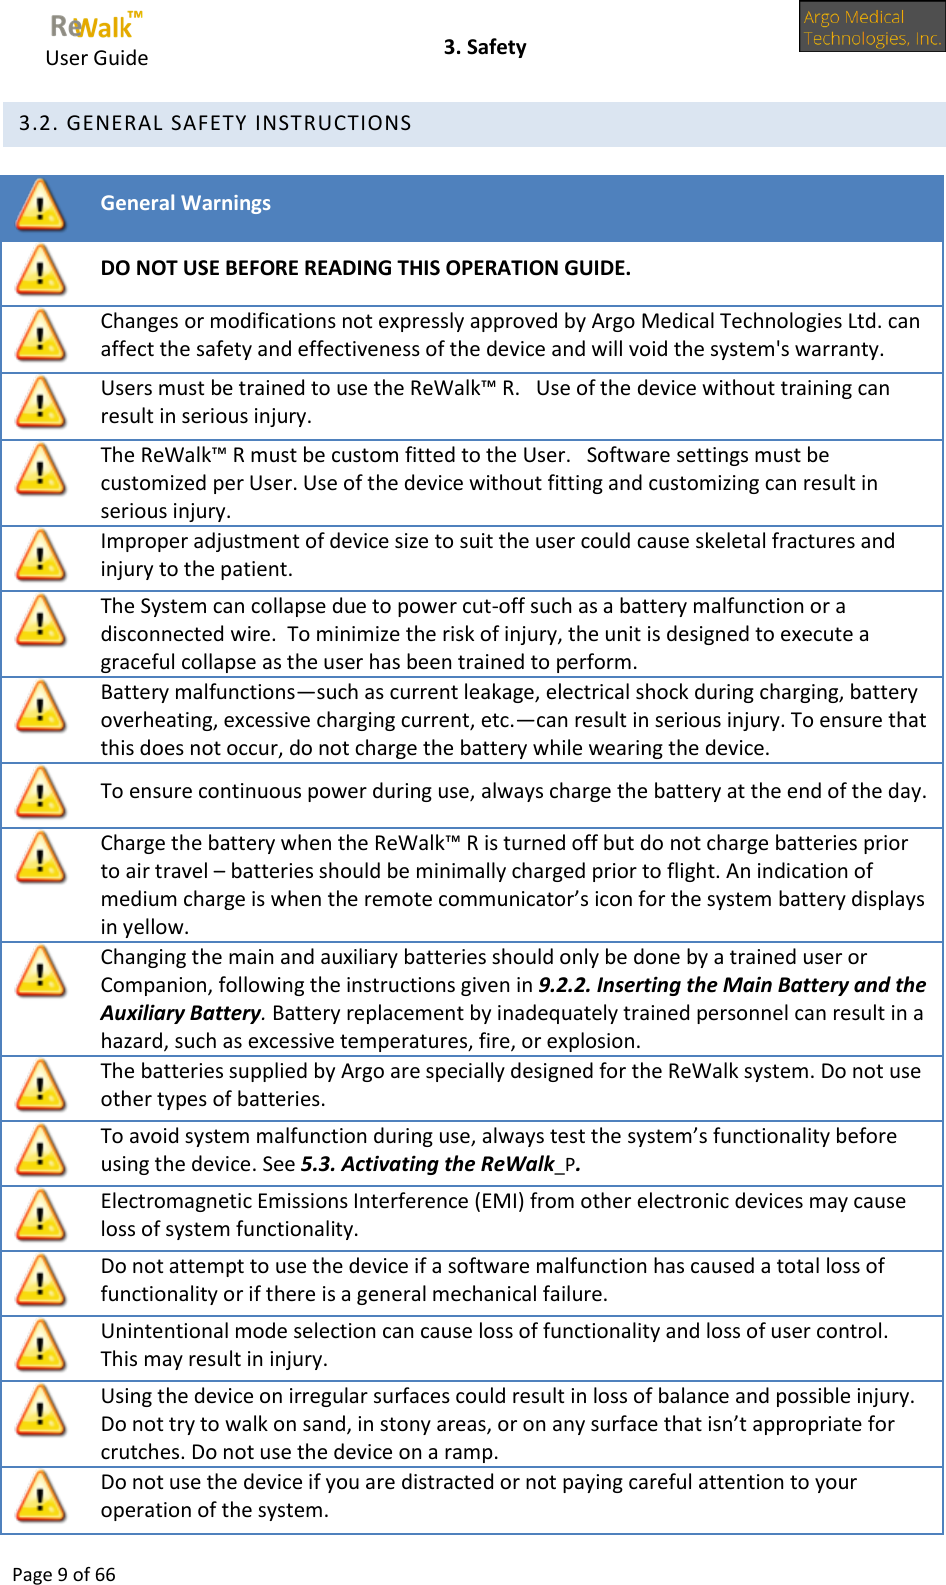     User Guide    3. Safety  Page 9 of 66   3.2. GENERAL SAFETY INSTRUCTIONS   General Warnings  DO NOT USE BEFORE READING THIS OPERATION GUIDE.  Changes or modifications not expressly approved by Argo Medical Technologies Ltd. can affect the safety and effectiveness of the device and will void the system&apos;s warranty.  Users must be trained to use the ReWalk™ R.   Use of the device without training can result in serious injury.  The ReWalk™ R must be custom fitted to the User.   Software settings must be customized per User. Use of the device without fitting and customizing can result in serious injury.  Improper adjustment of device size to suit the user could cause skeletal fractures and injury to the patient.  The System can collapse due to power cut-off such as a battery malfunction or a disconnected wire.  To minimize the risk of injury, the unit is designed to execute a graceful collapse as the user has been trained to perform.  Battery malfunctions—such as current leakage, electrical shock during charging, battery overheating, excessive charging current, etc.—can result in serious injury. To ensure that this does not occur, do not charge the battery while wearing the device.  To ensure continuous power during use, always charge the battery at the end of the day.  Charge the battery when the ReWalk™ R is turned off but do not charge batteries prior to air travel – batteries should be minimally charged prior to flight. An indication of medium charge is when the remote communicator’s icon for the system battery displays in yellow.  Changing the main and auxiliary batteries should only be done by a trained user or Companion, following the instructions given in 9.2.2. Inserting the Main Battery and the Auxiliary Battery. Battery replacement by inadequately trained personnel can result in a hazard, such as excessive temperatures, fire, or explosion.  The batteries supplied by Argo are specially designed for the ReWalk system. Do not use other types of batteries.  To avoid system malfunction during use, always test the system’s functionality before using the device. See 5.3. Activating the ReWalk_P.  Electromagnetic Emissions Interference (EMI) from other electronic devices may cause loss of system functionality.   Do not attempt to use the device if a software malfunction has caused a total loss of functionality or if there is a general mechanical failure.  Unintentional mode selection can cause loss of functionality and loss of user control.  This may result in injury.  Using the device on irregular surfaces could result in loss of balance and possible injury. Do not try to walk on sand, in stony areas, or on any surface that isn’t appropriate for crutches. Do not use the device on a ramp.  Do not use the device if you are distracted or not paying careful attention to your operation of the system. 